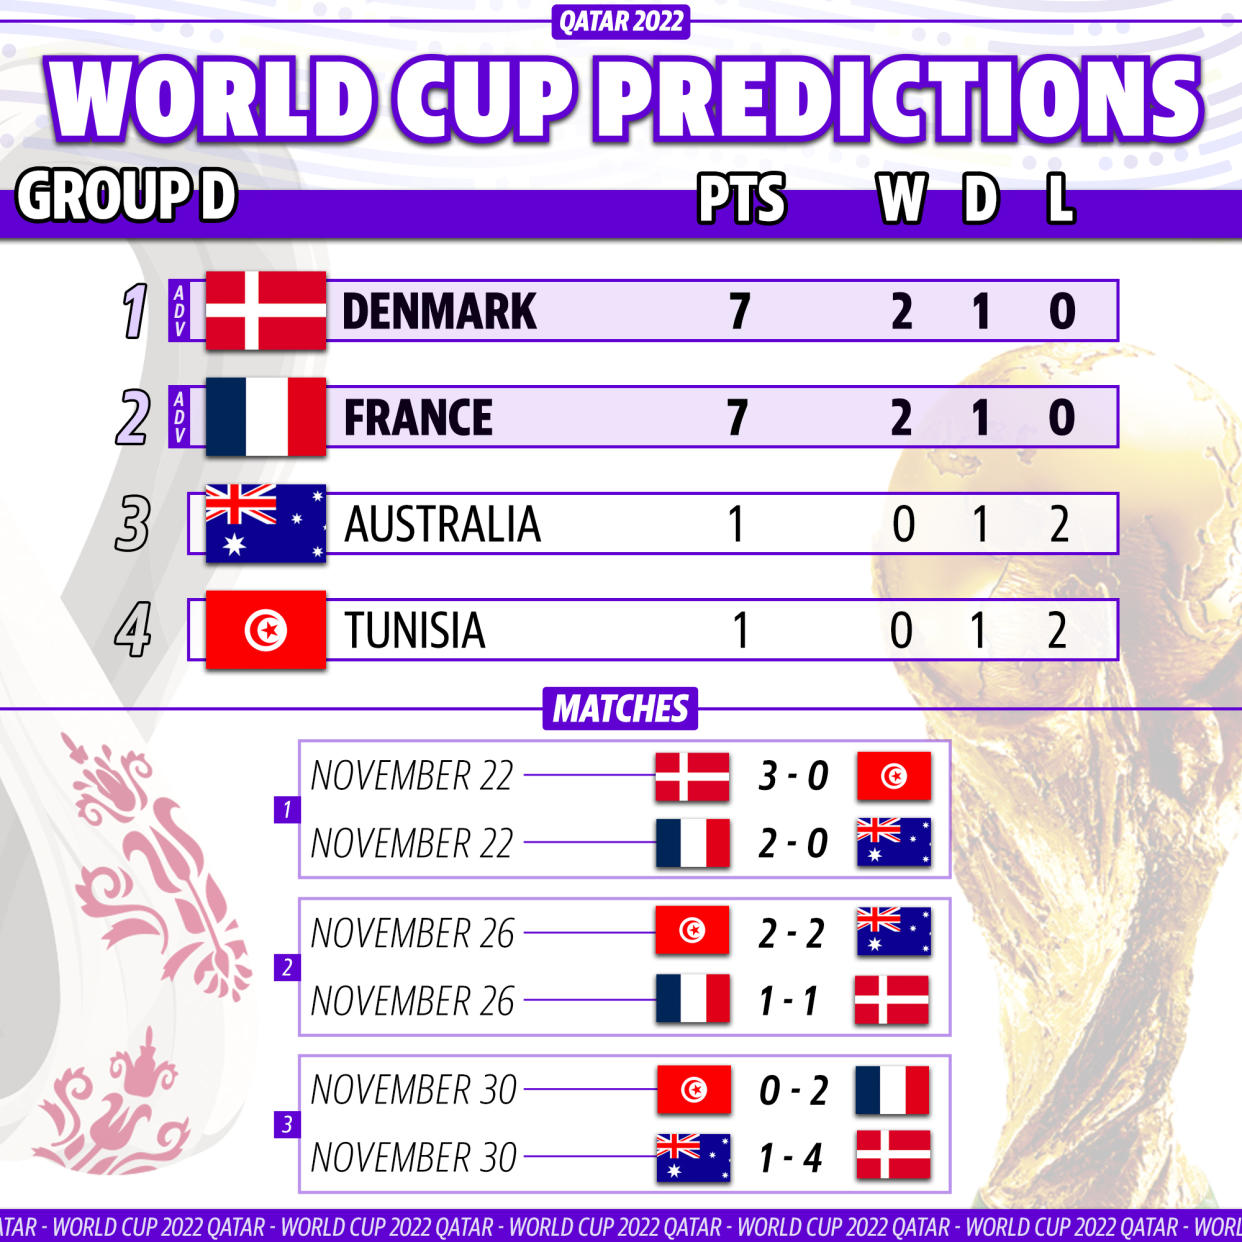 Yahoo Sports soccer writer Henry Bushnell's prediction for how Group D plays out at the 2022 World Cup. (Graphic by Michael Wagstaffe/Yahoo Sports)